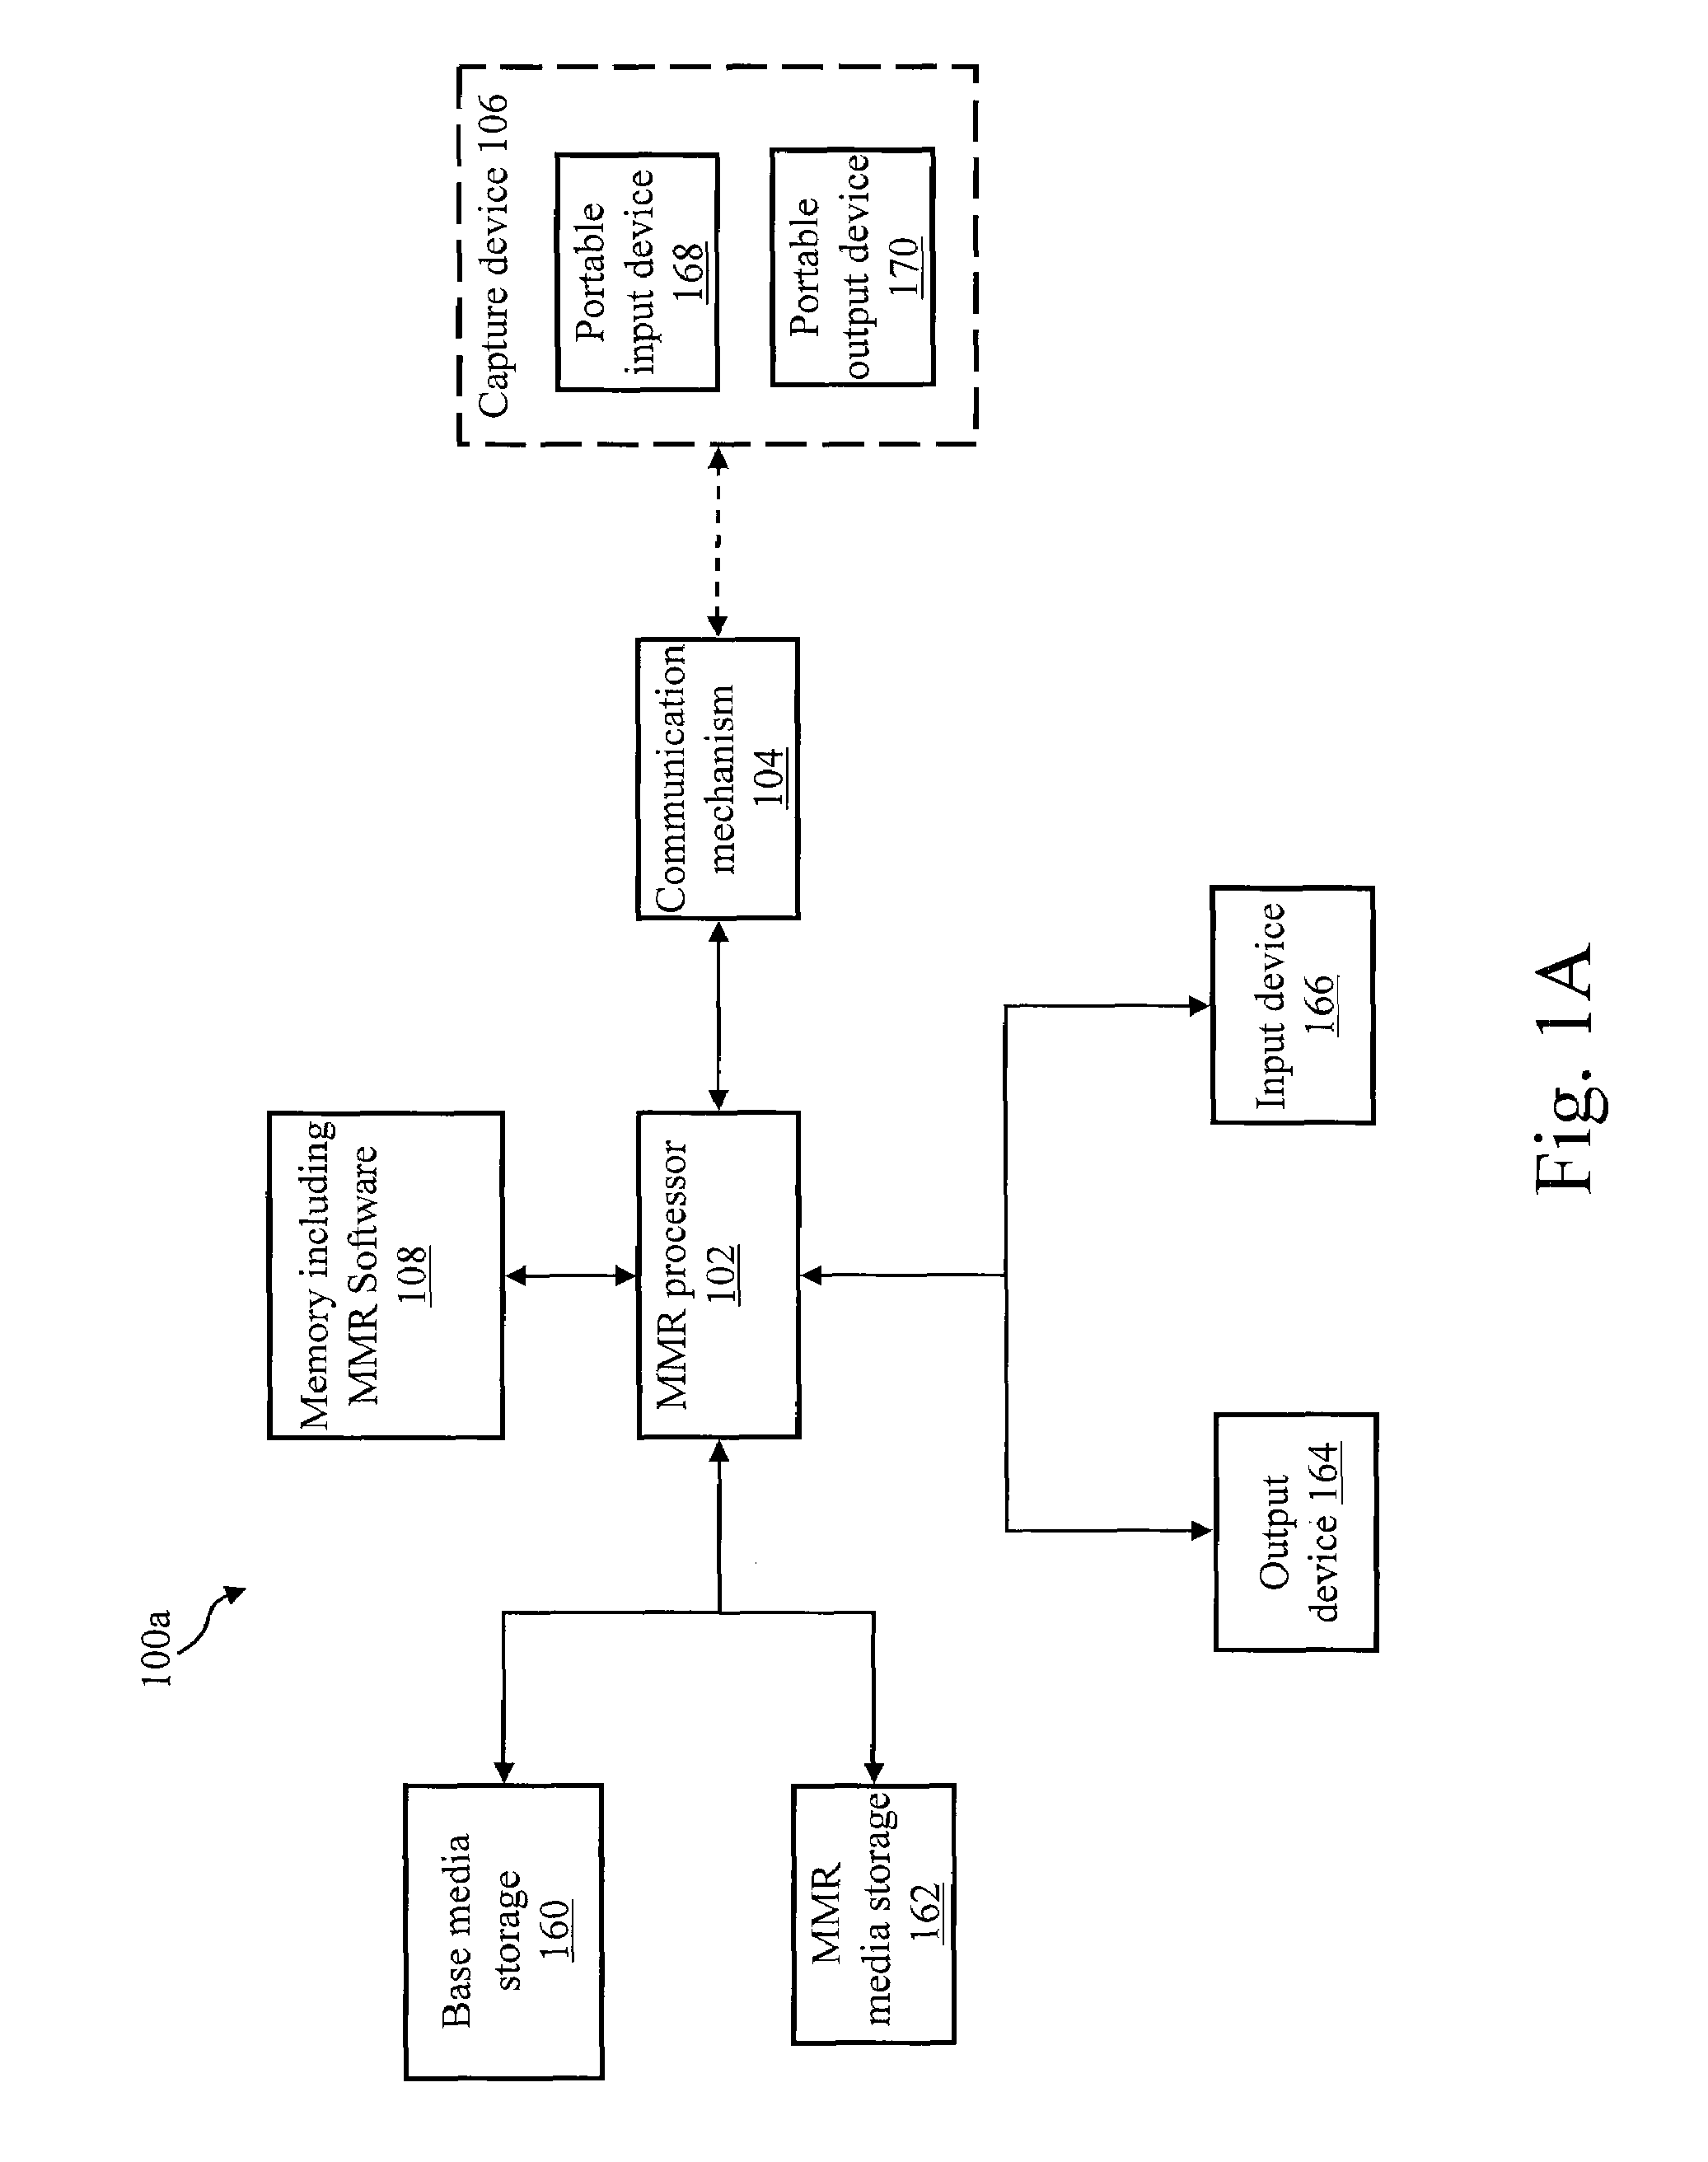 System and methods for creation and use of a mixed media environment